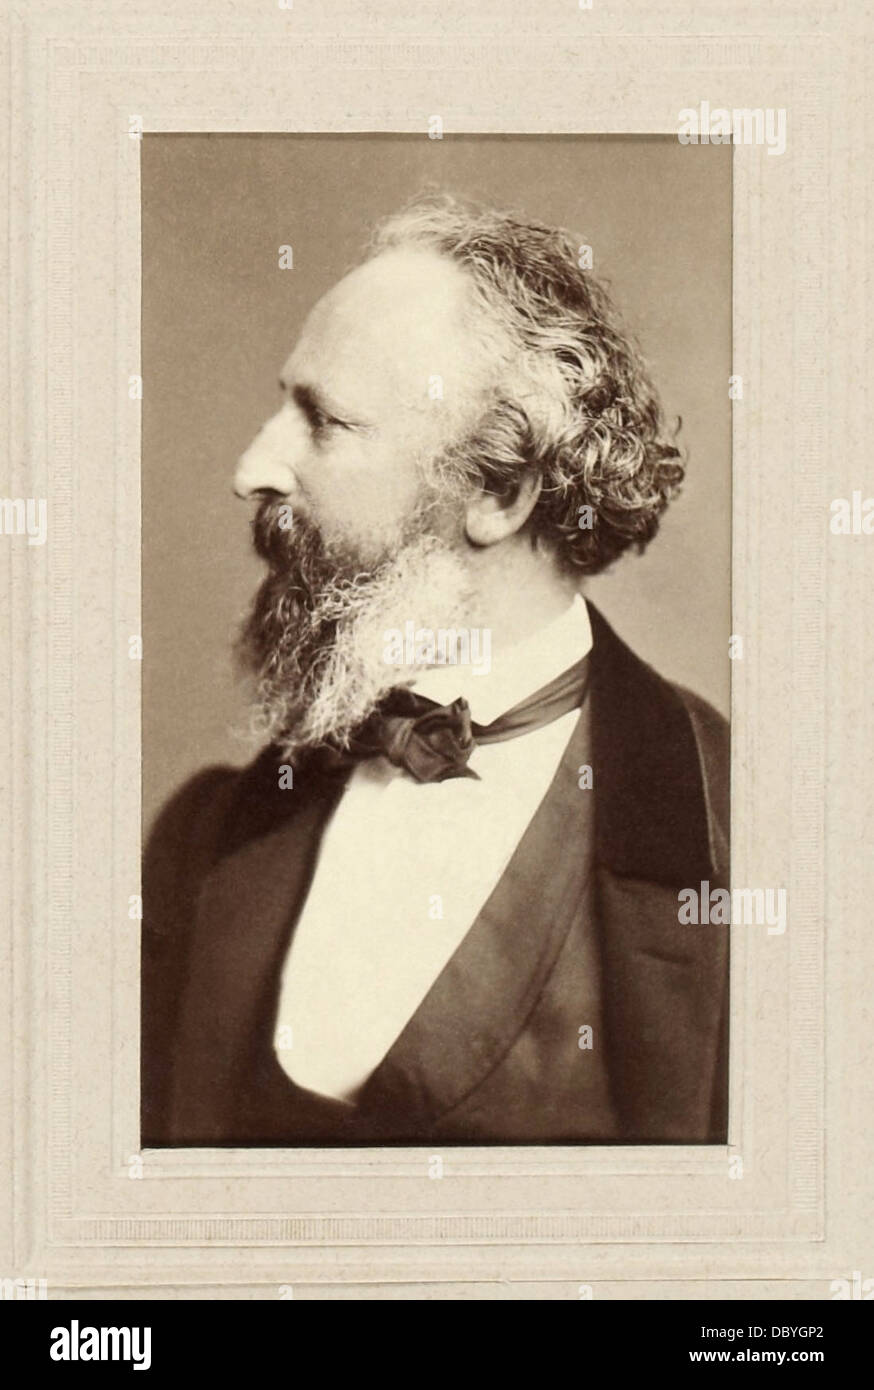 Solved In 1869, German physician Carl Wunderlich published